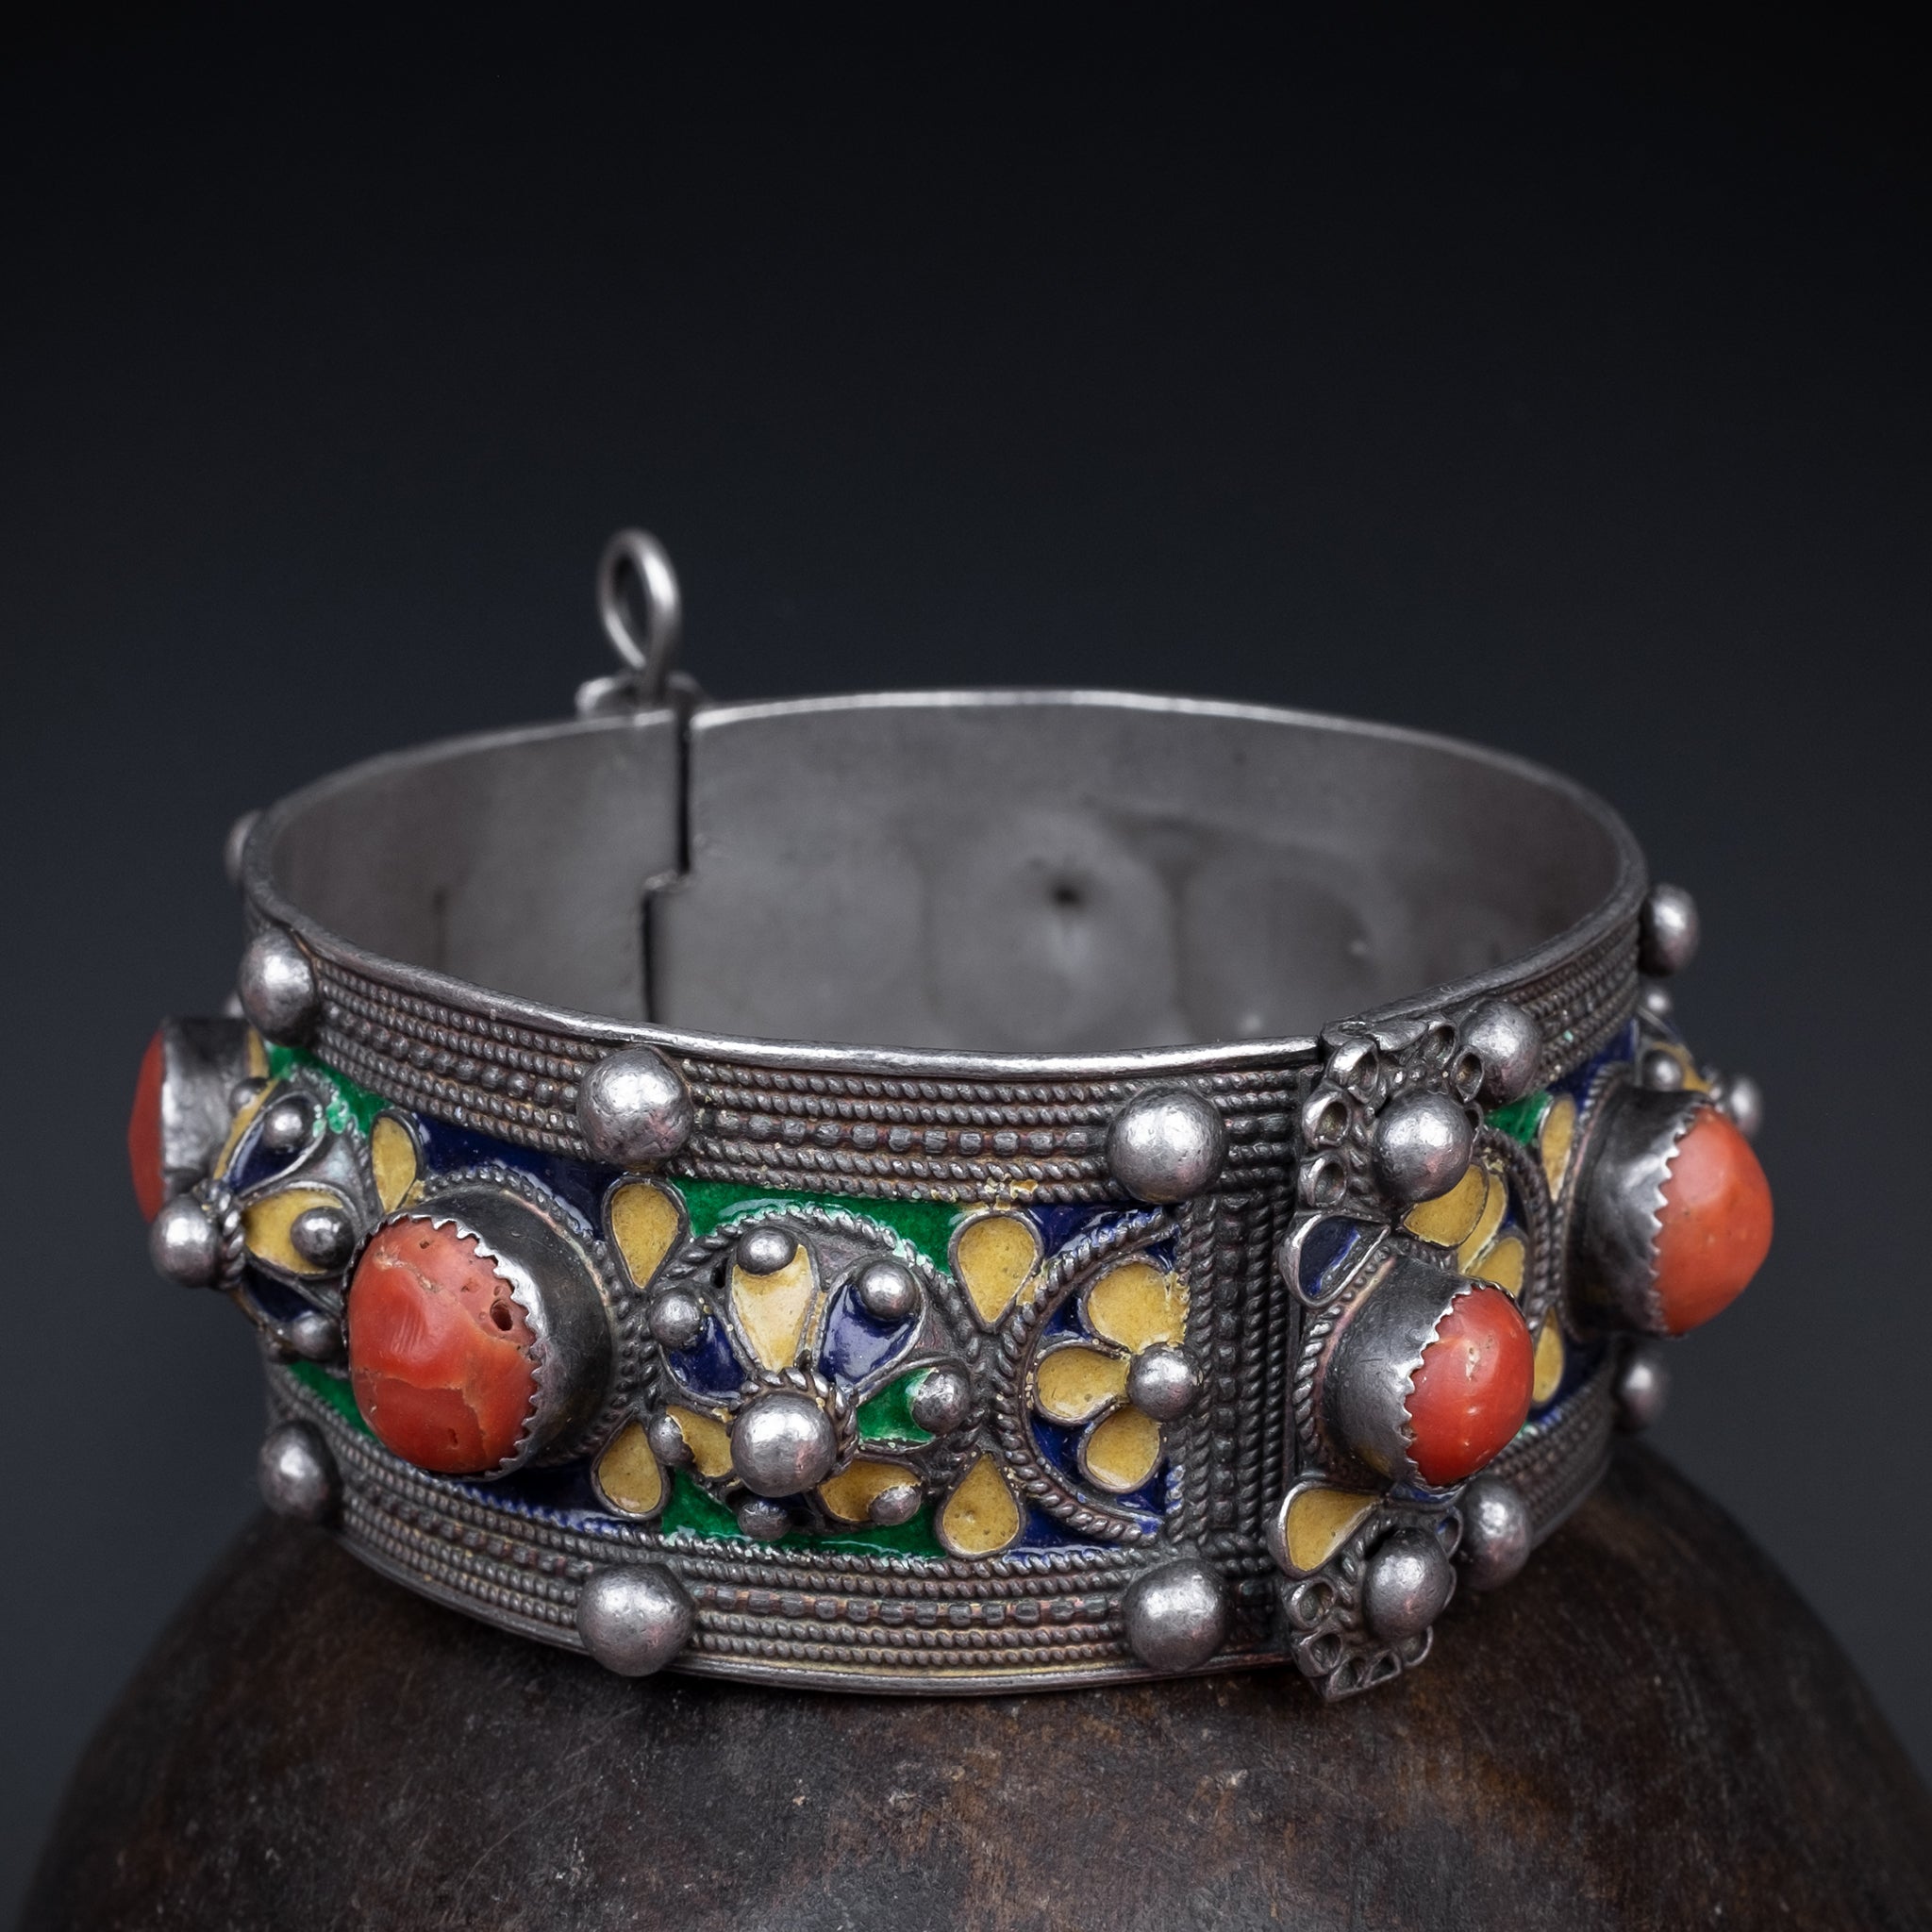 Old bracelet cuff traditional Kabyle Algeria silver and real red coral  64,23g | eBay